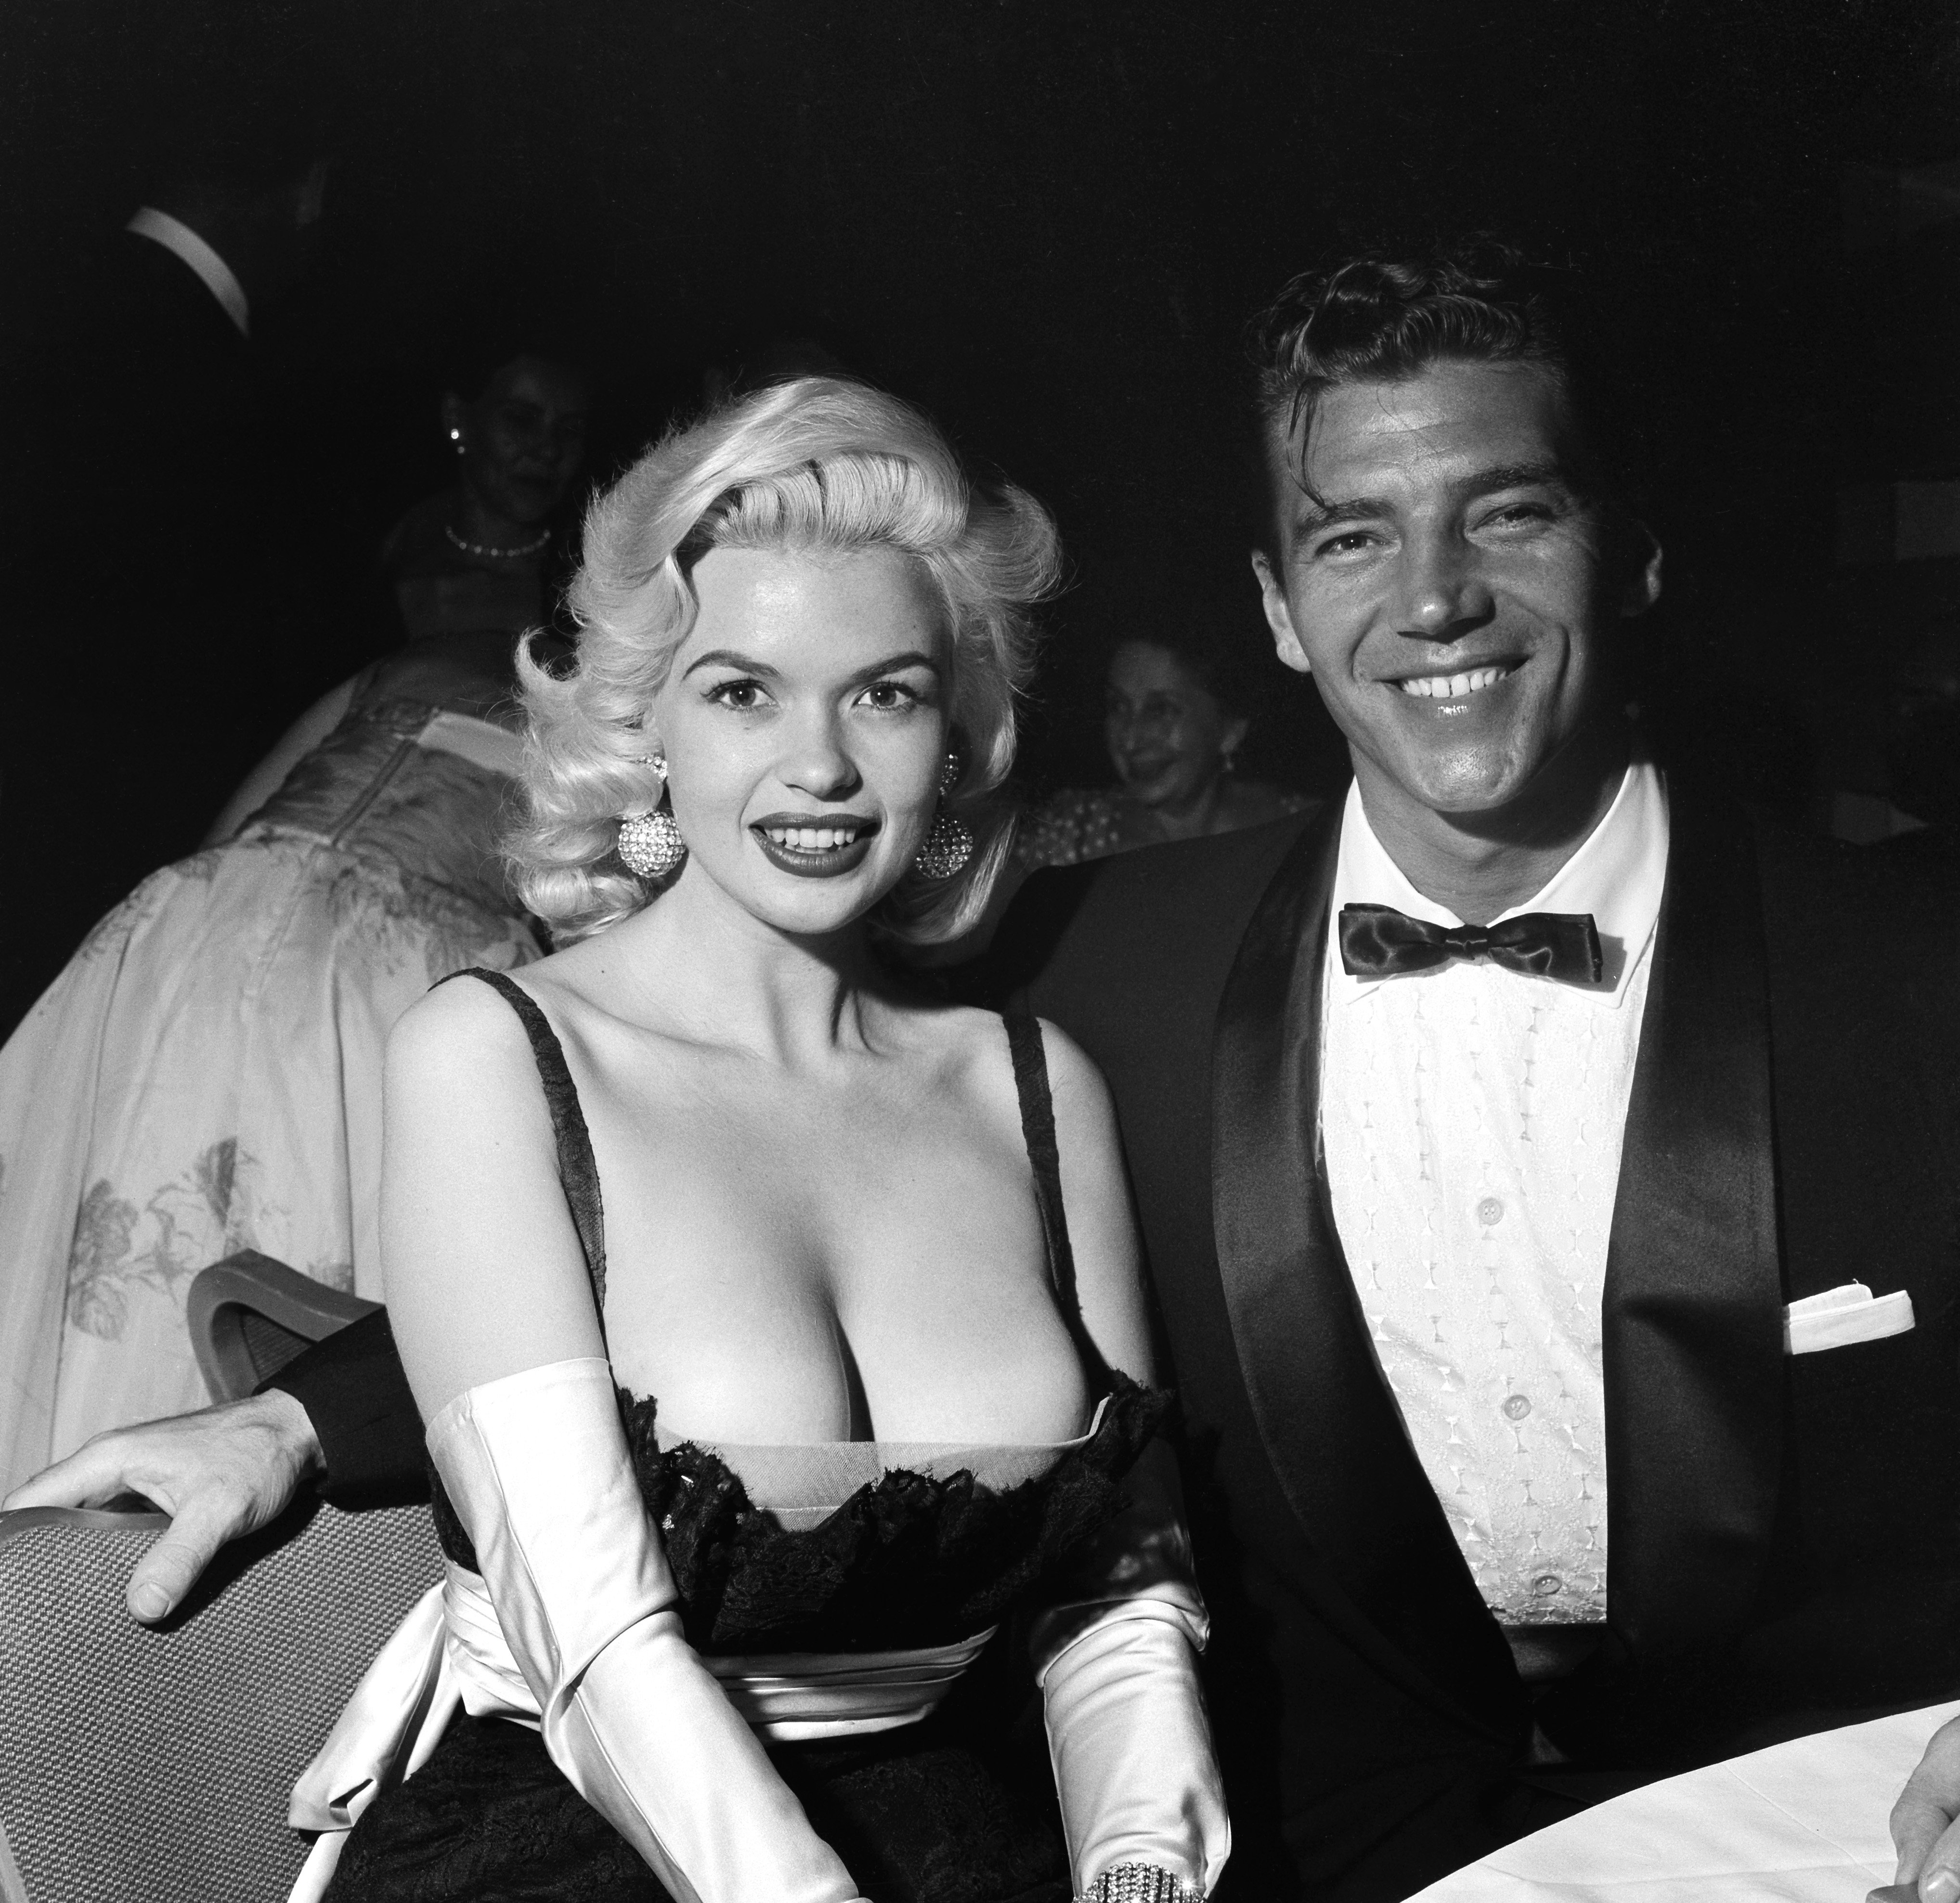 Actress Jayne Mansfield and Mickey Hargitay attend the Makeup Artist Ball in Los Angeles,California. | Photo: Getty Images